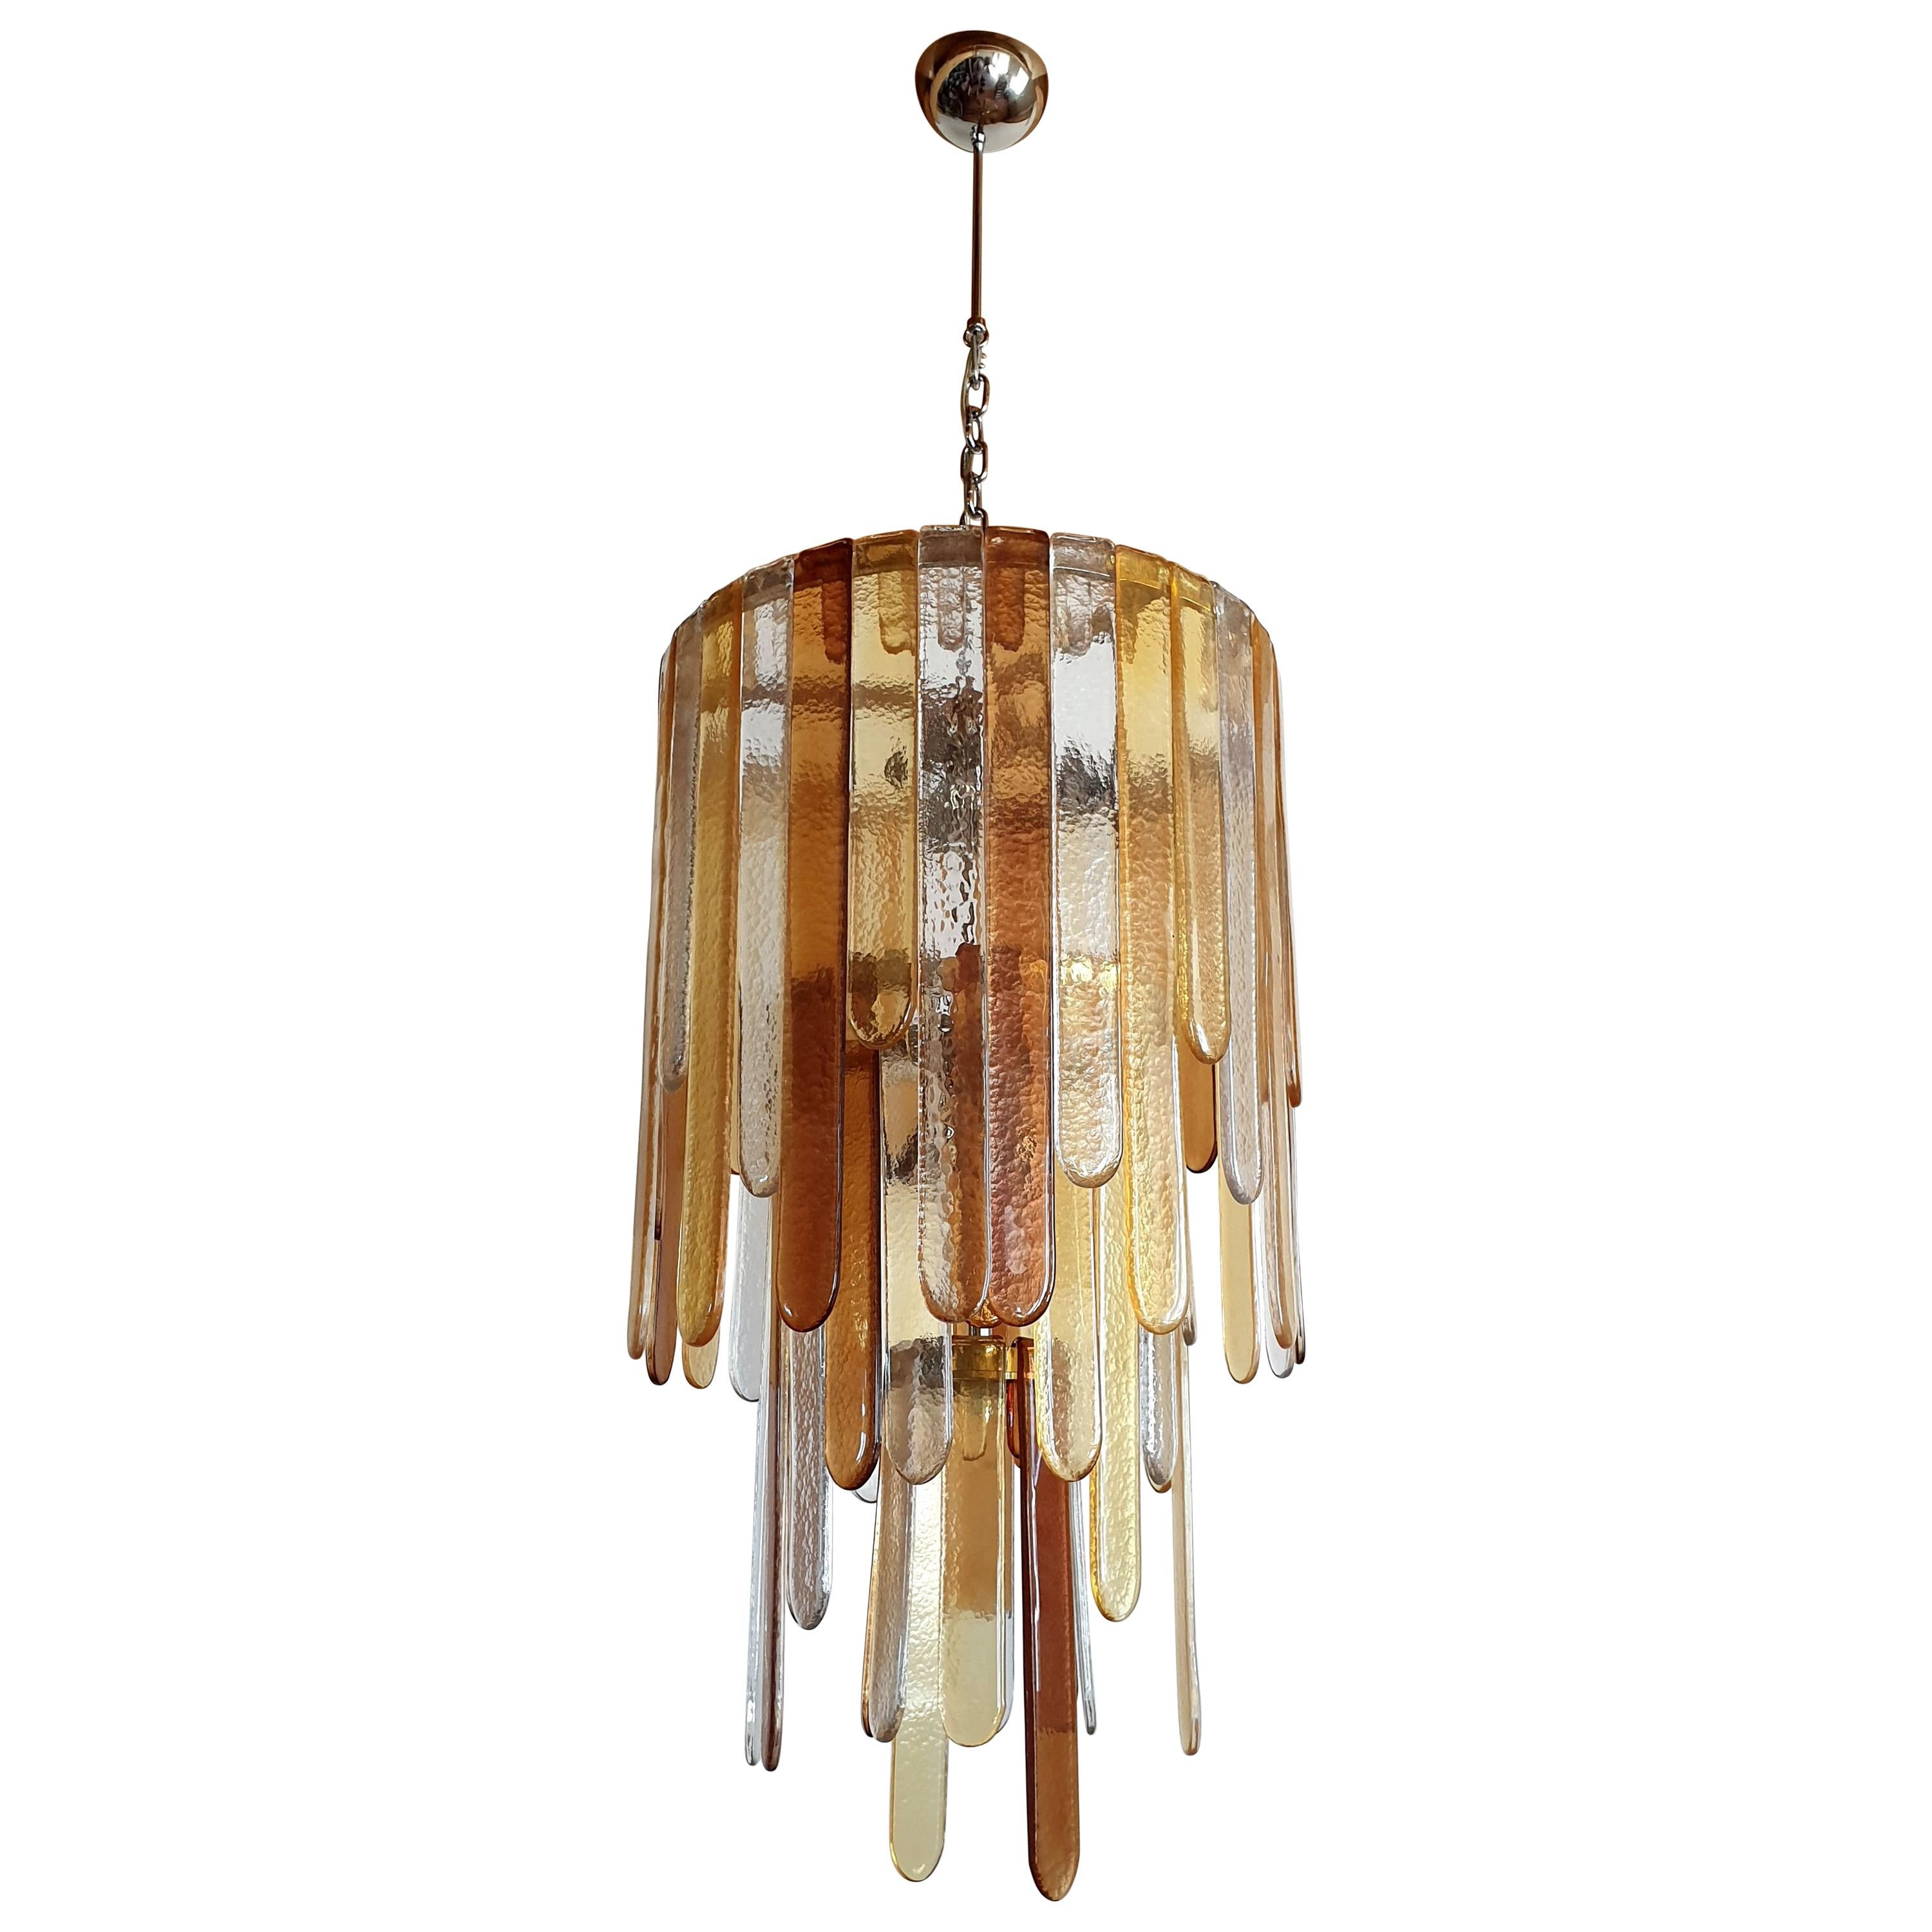 Large Mid-Century Modern Murano glass pendant chandelier, by Mazzega, Italy, 1970s.
With 3 tiers of Murano glass hooks: transparent, honey and light brown; in 4 different heights, giving a rythm, a cascading effect.
6 lights, rewired for medium